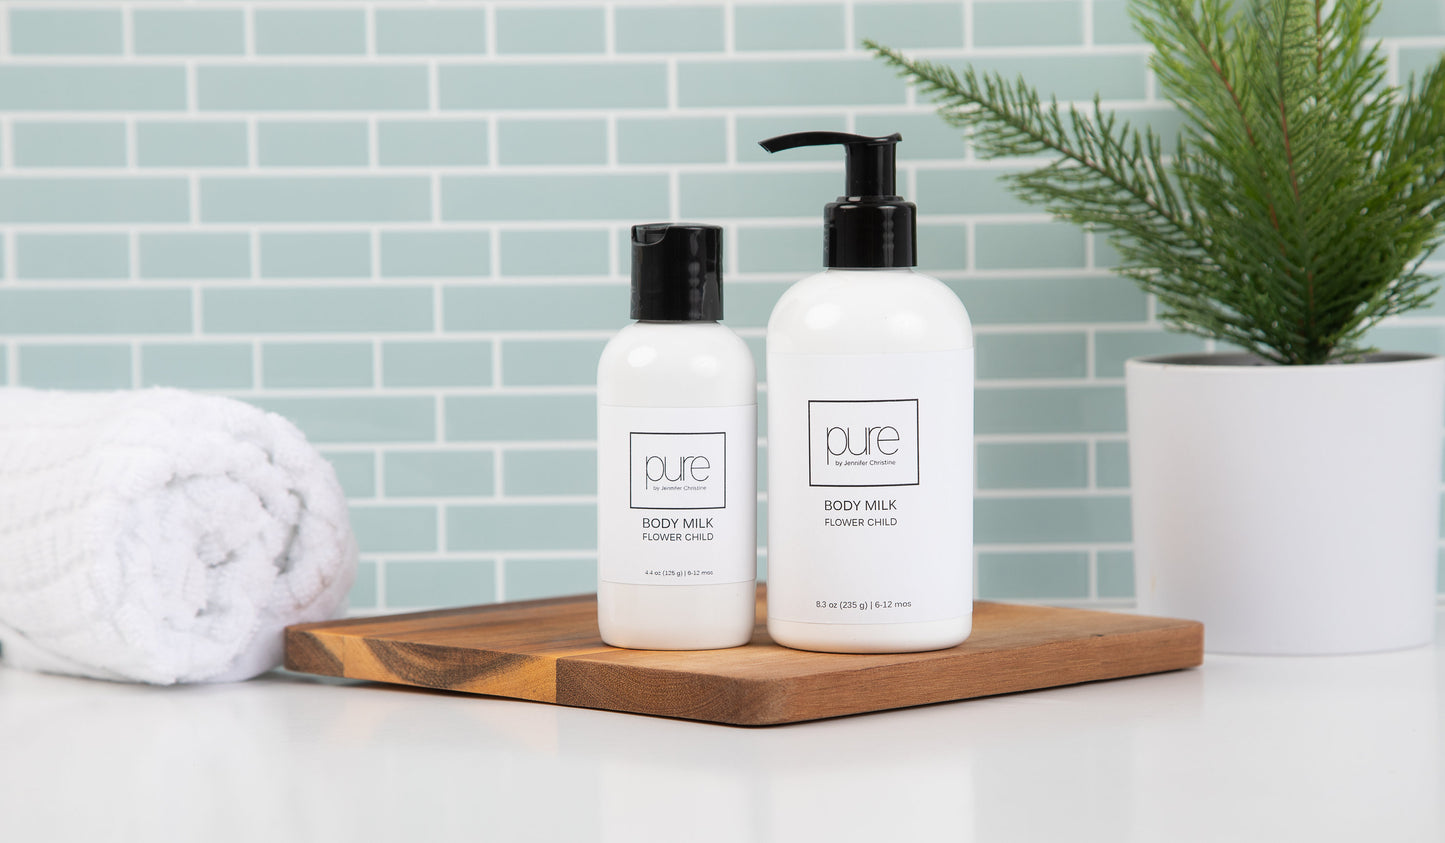 Plant-based lightweight lotion that provides nourishment and hydration for your skin while also promoting healing and restoration due to high properties of natural botanicals.  Choose from 3 scents to find your perfect match.